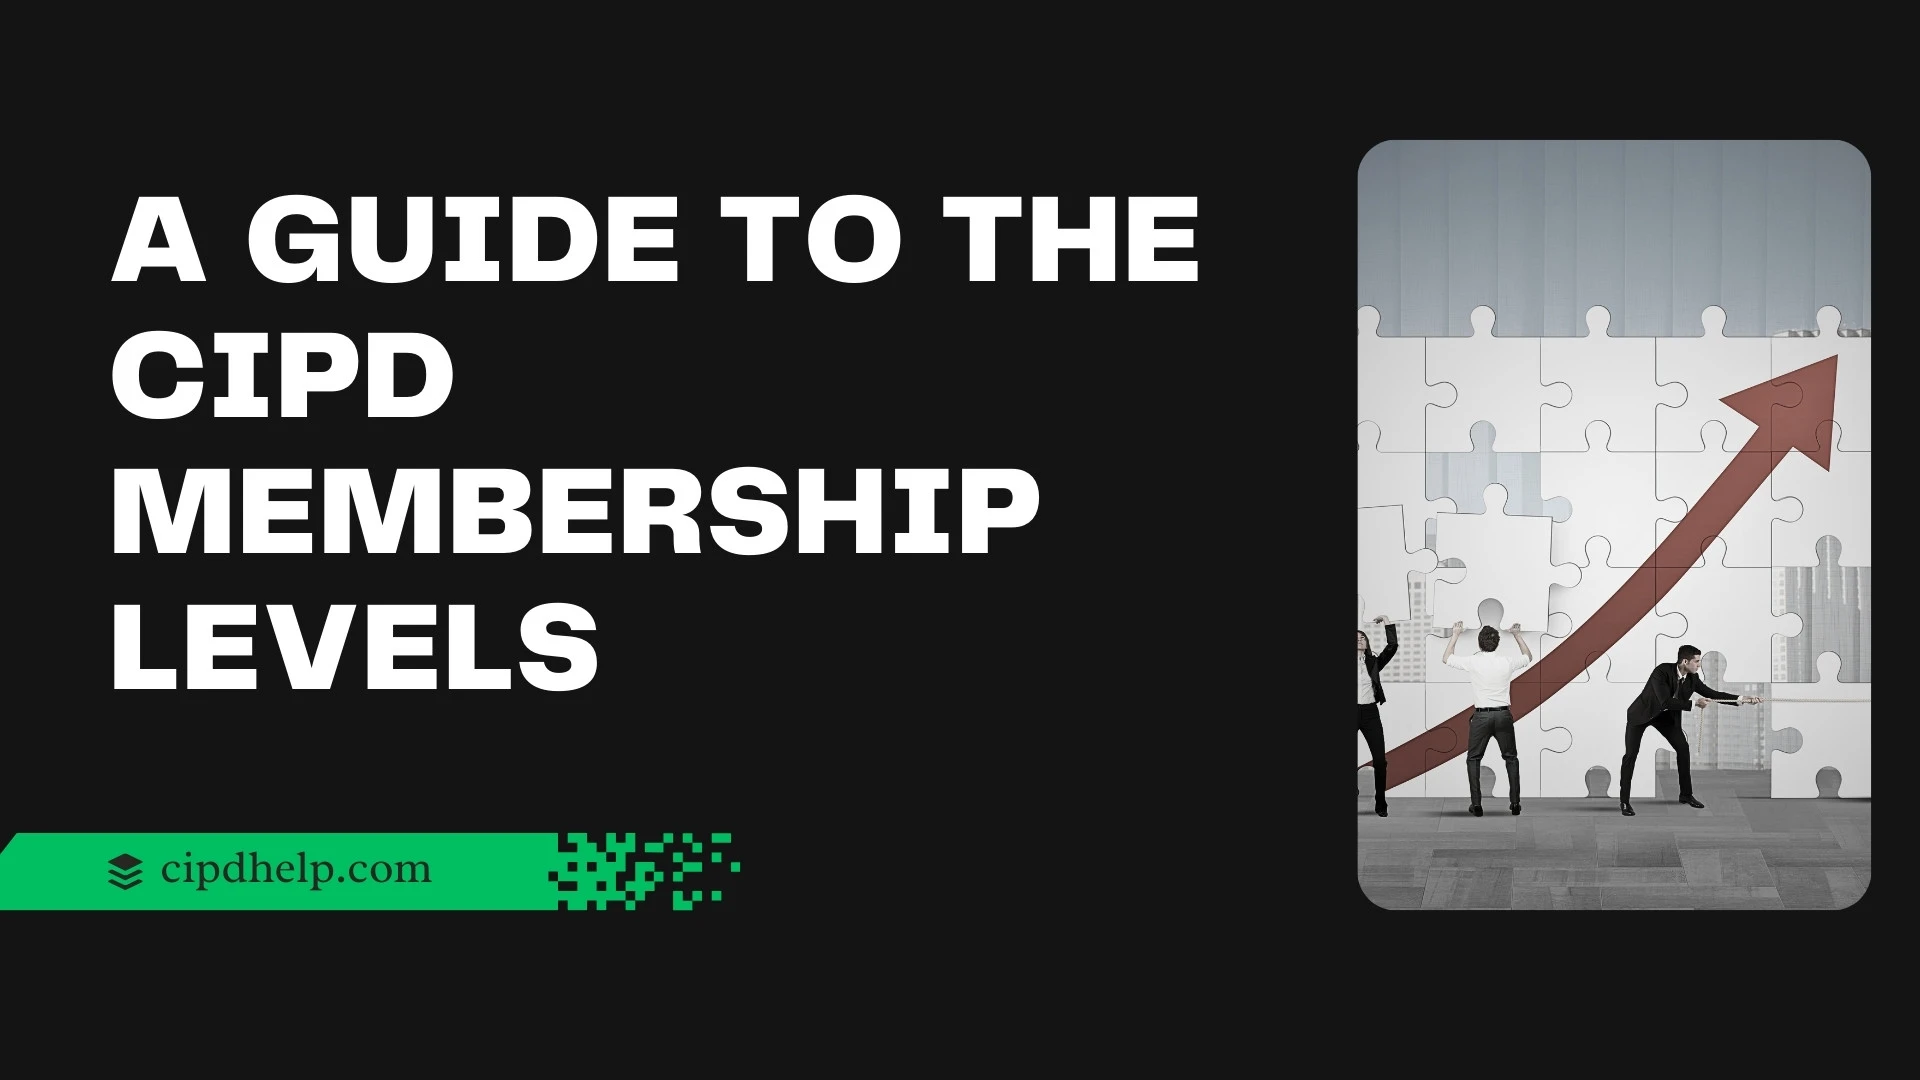 A Guide to the CIPD Membership Levels